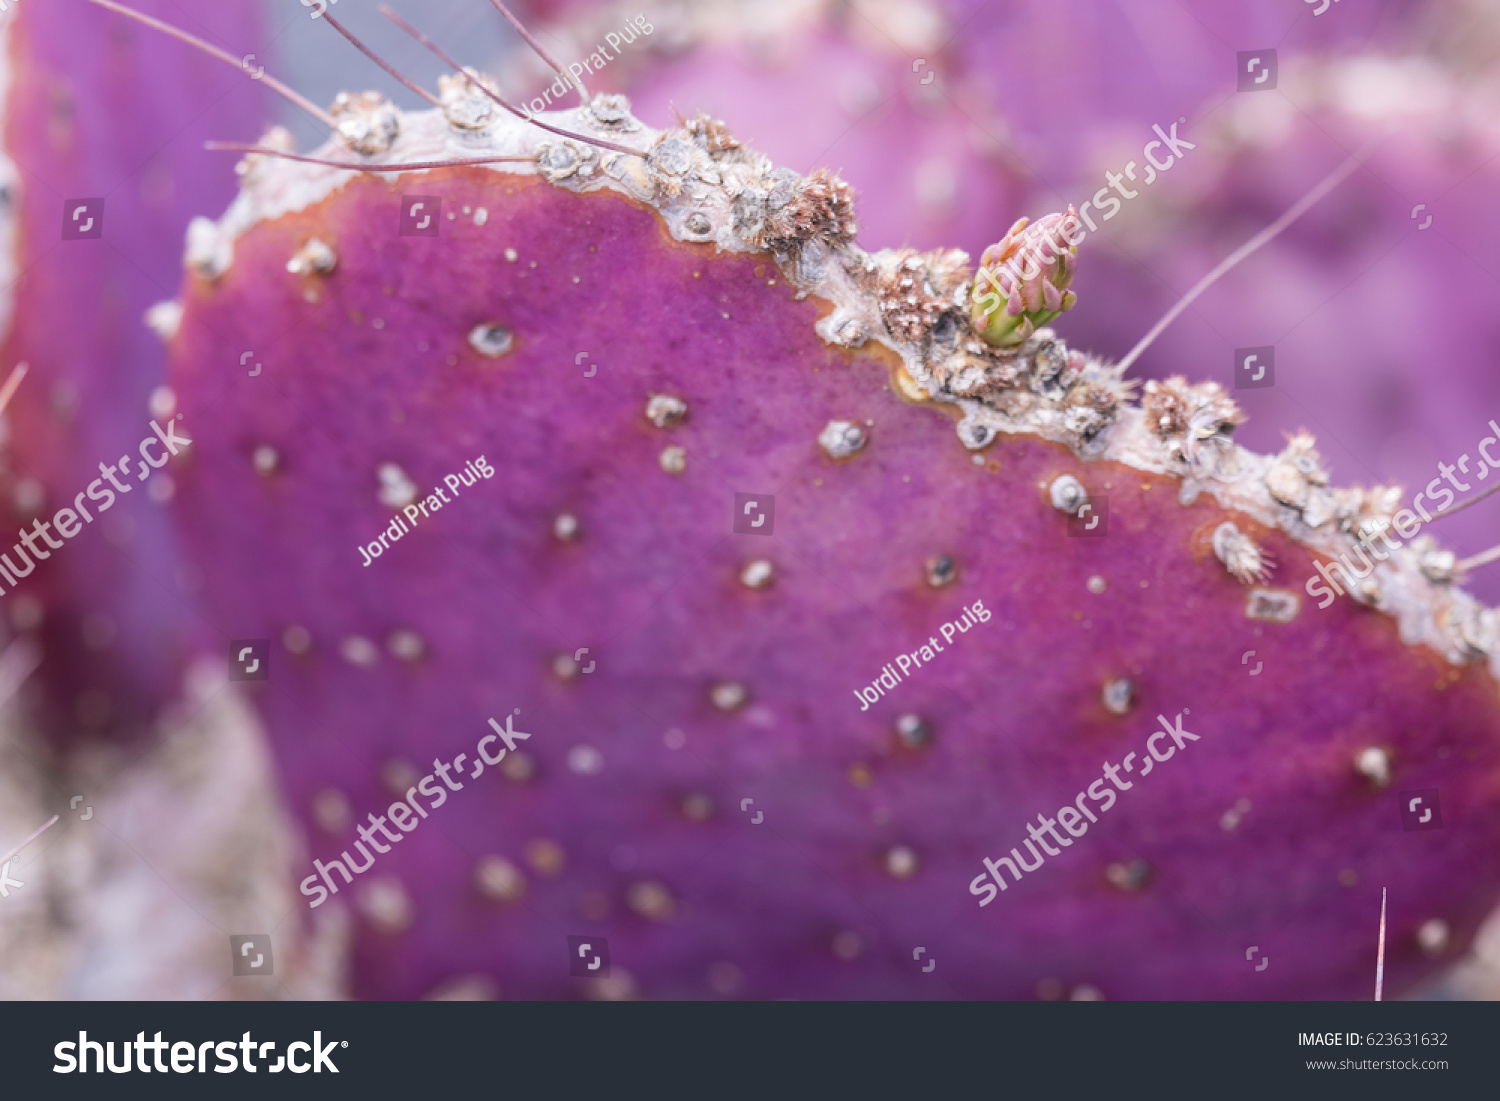 Pink cactus heart shaped with spikes close up #623631632